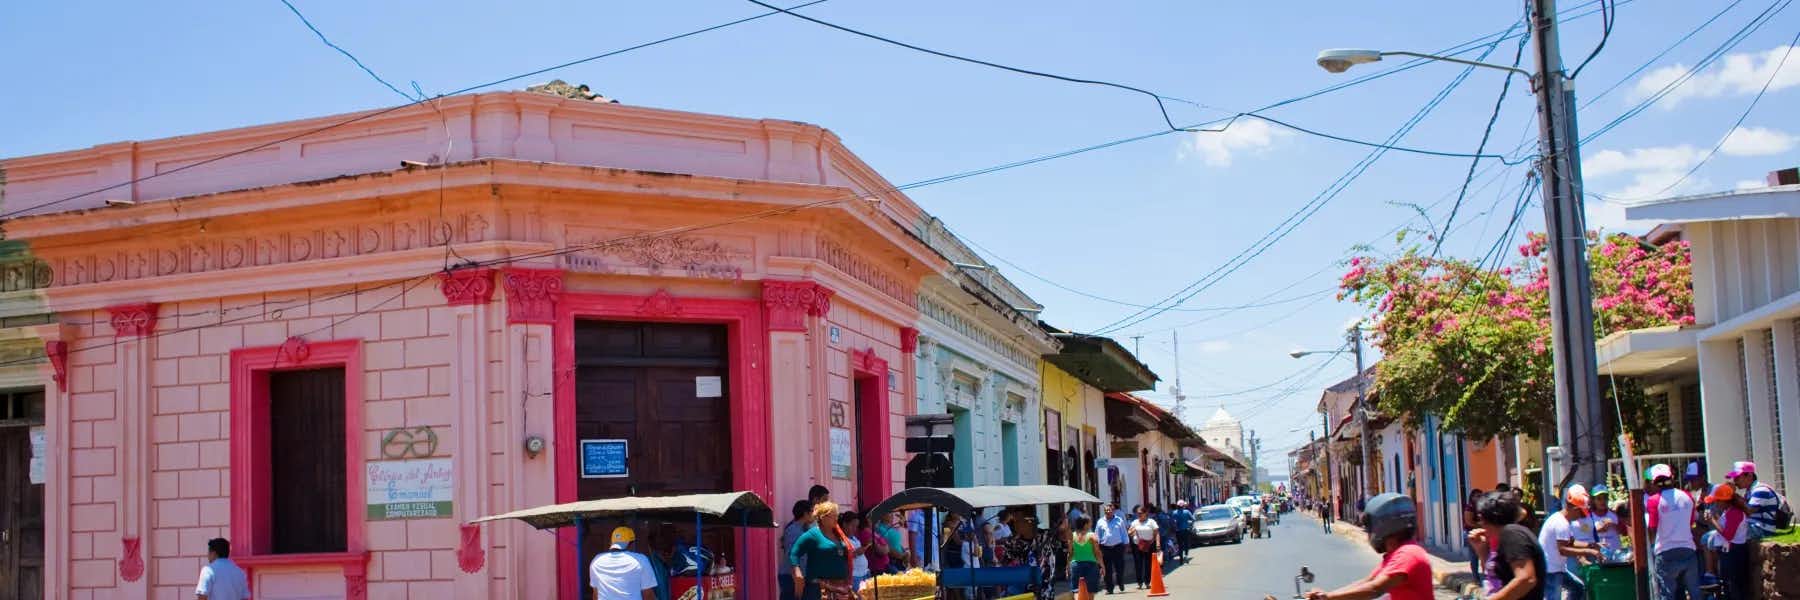 Traditions and Culture in Nicaragua